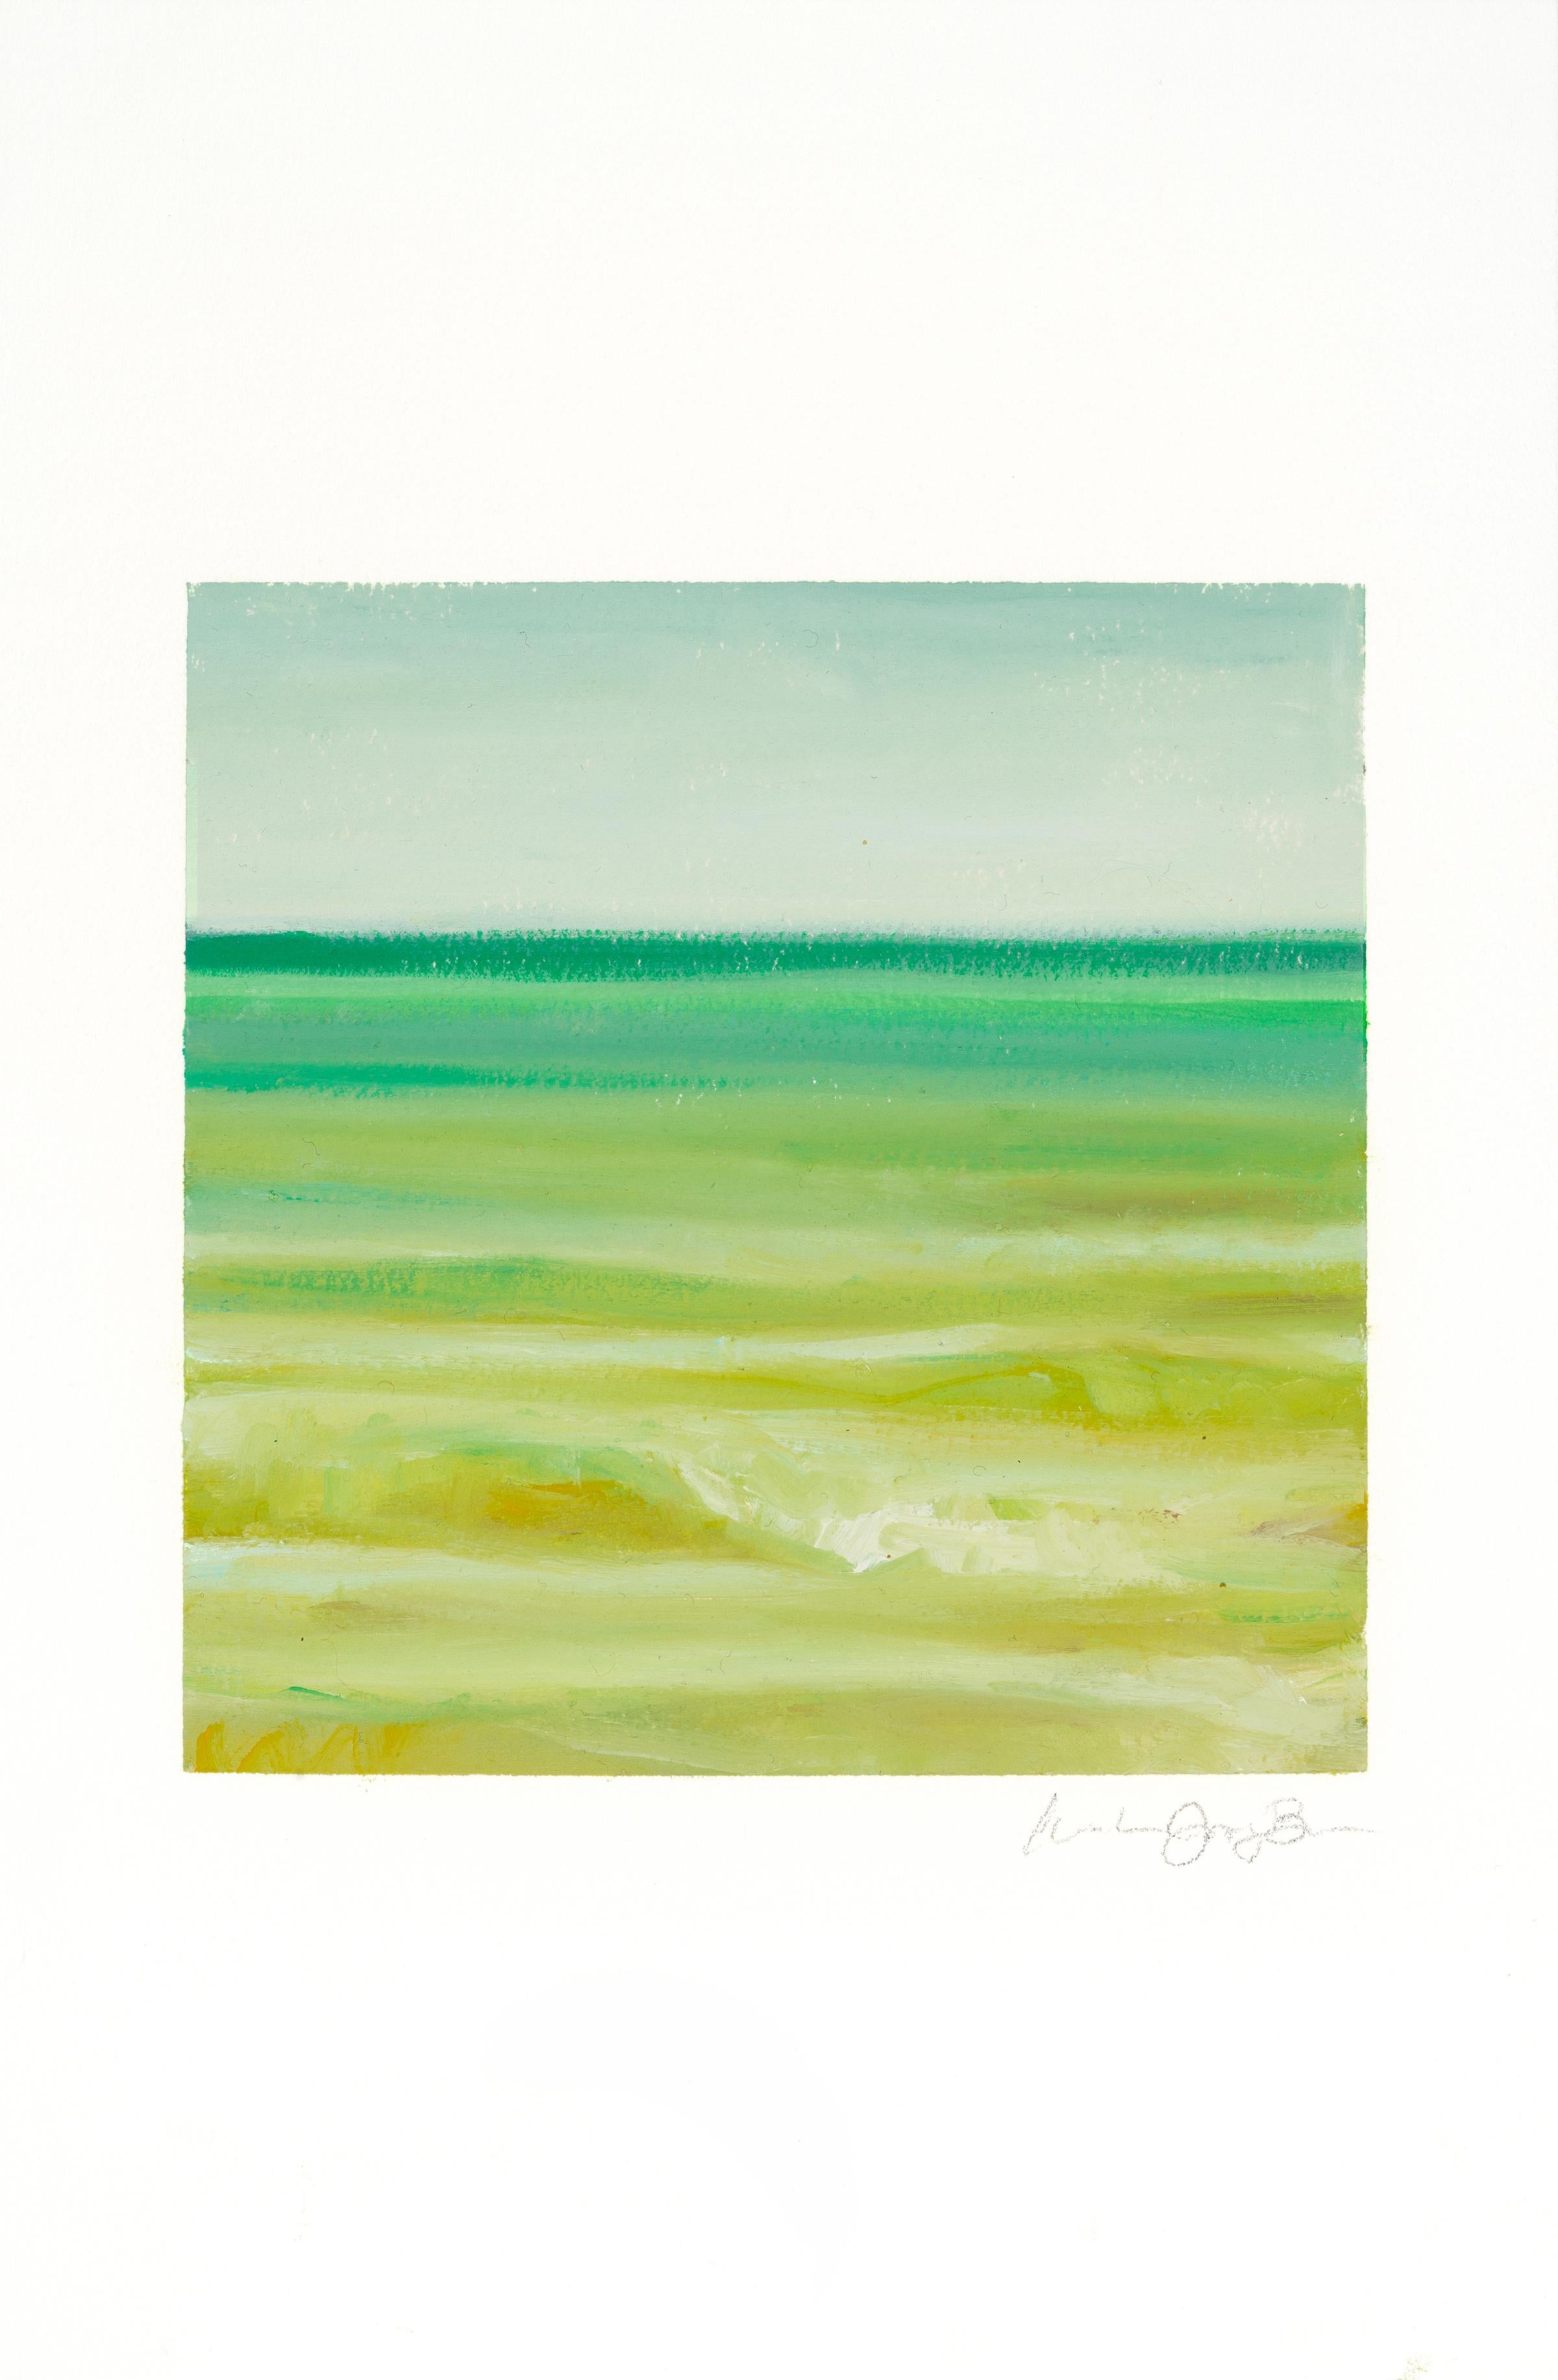 Amanda Joy Brown Landscape Painting - EMERALDO COAST - Phthalo Green, Yellow, and Blue Painting w/ Ocean and Sky